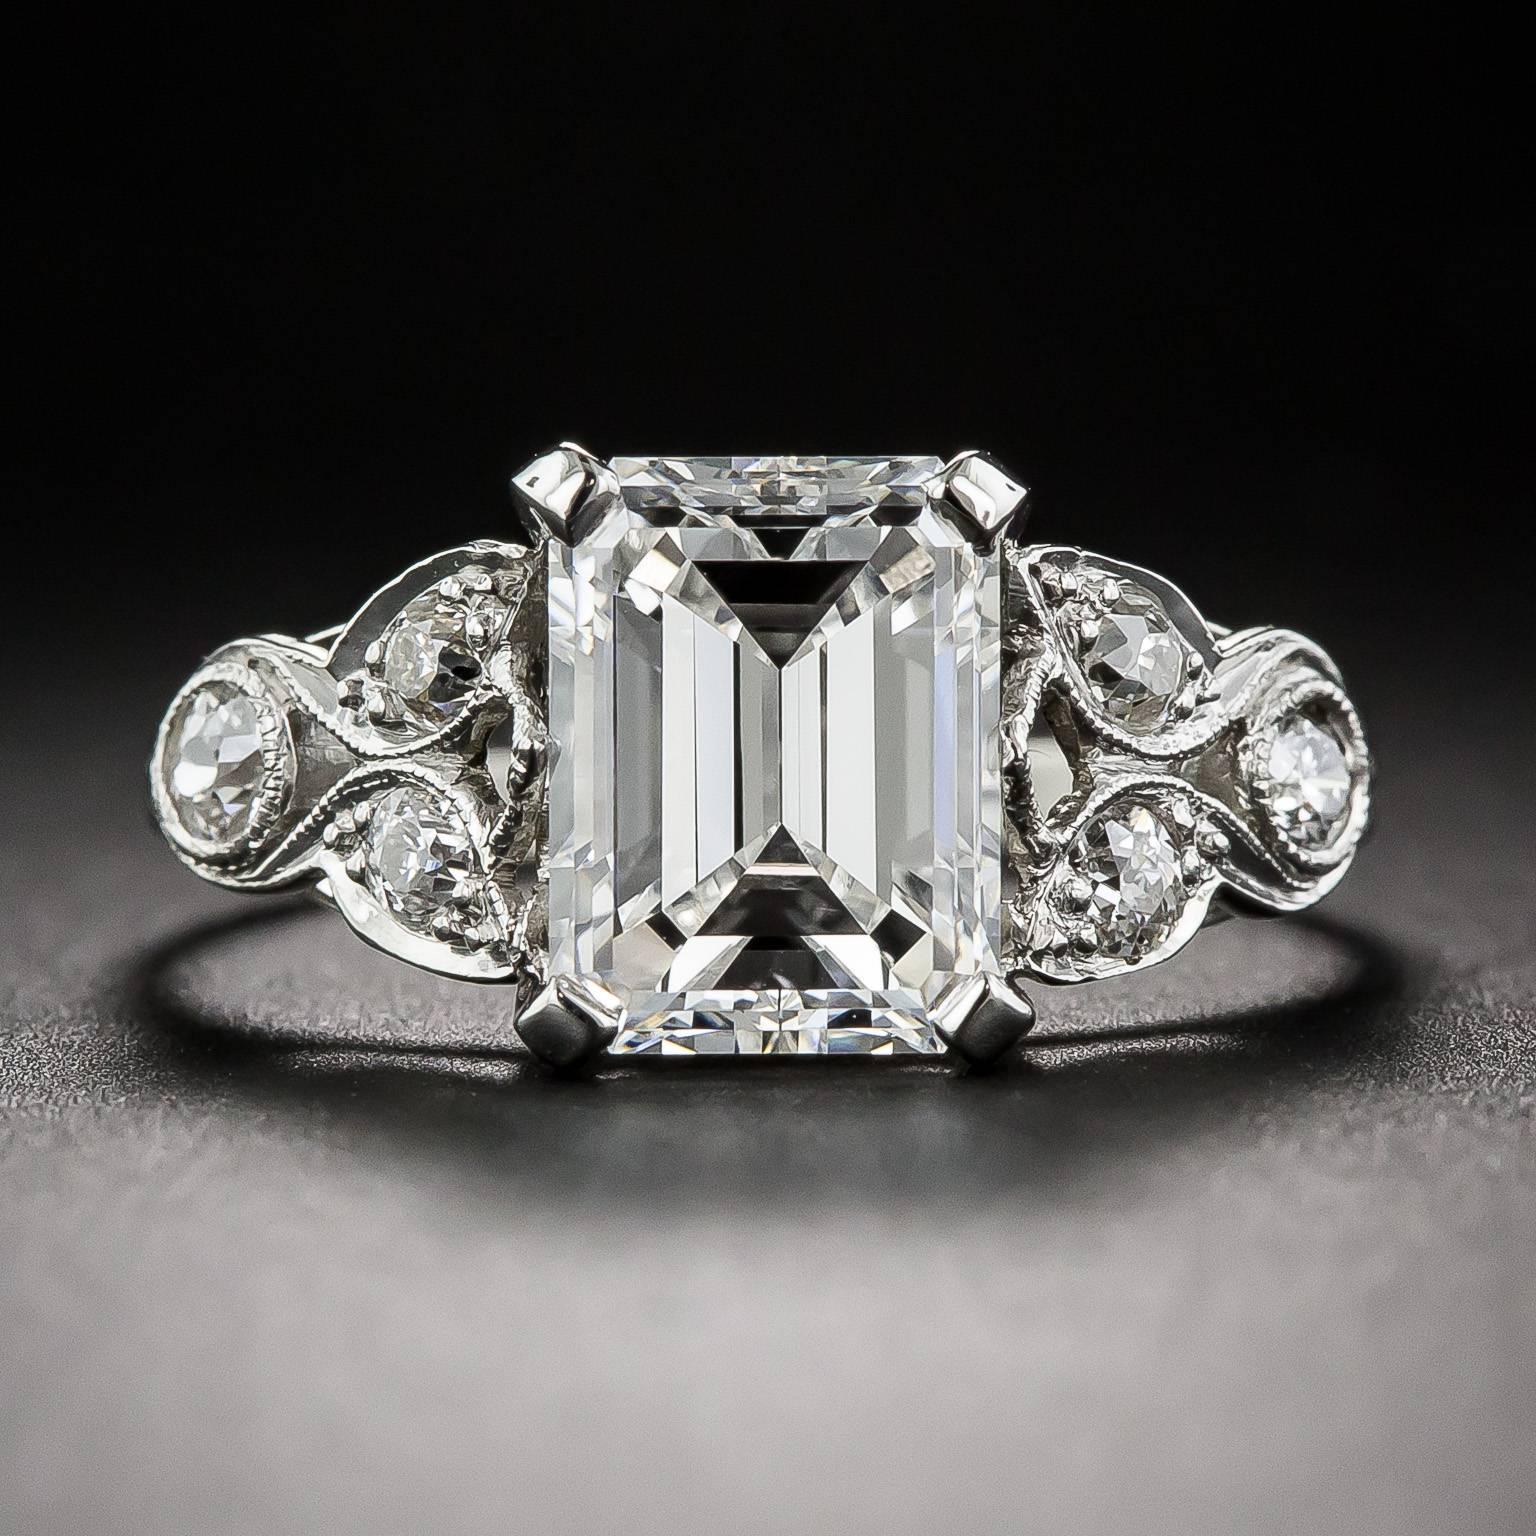 An absolutely dreamy, original - circa 1920 - Art Deco engagement ring featuring a bright white and stunning 2.03 carat emerald-cut diamond with a GIA Diamond Grading Report stating G color and VS1 clarity. The radiant rock is showcased in an